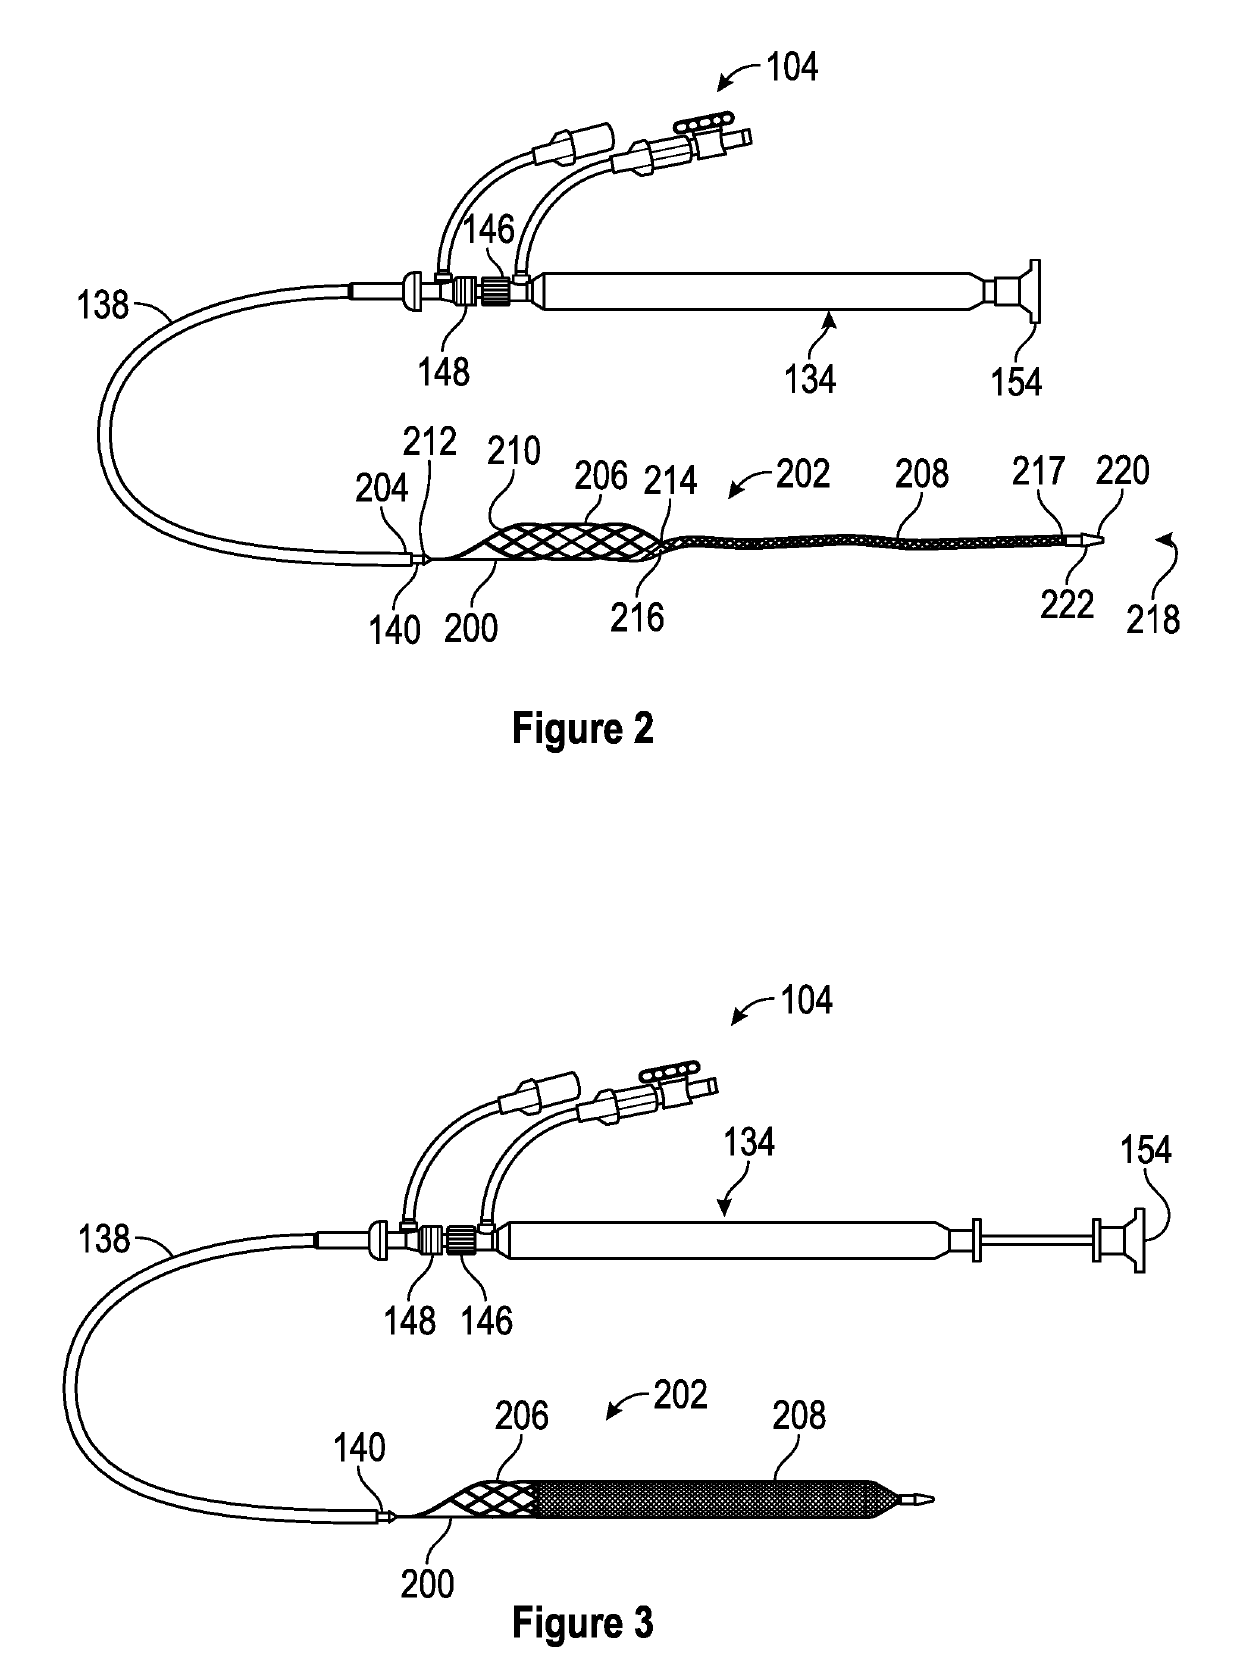 Intravascular treatment of vascular occlusion and associated devices, systems, and methods